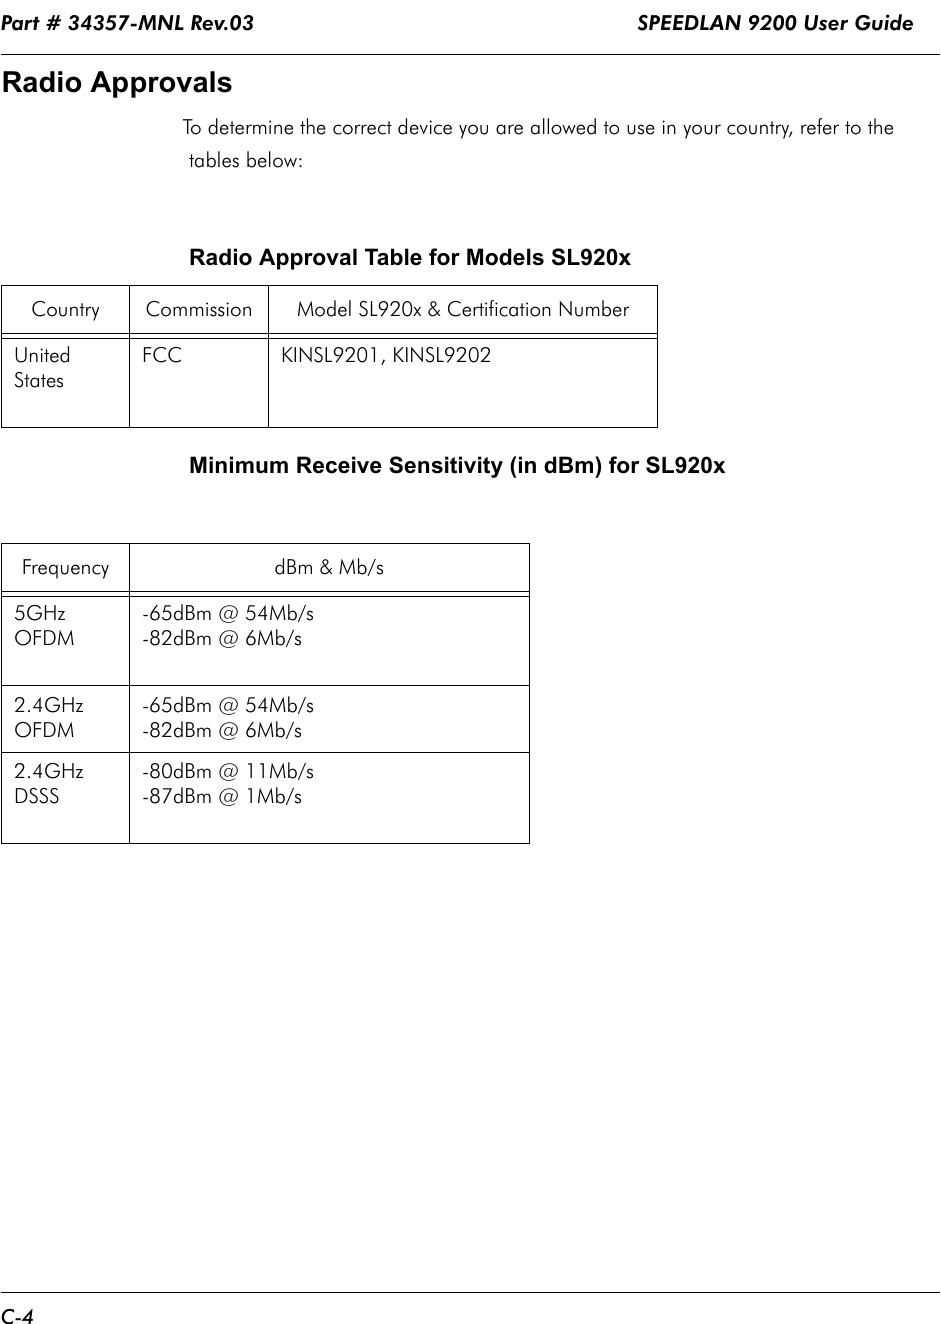 Part # 34357-MNL Rev.03                                                              SPEEDLAN 9200 User Guide C-4Radio ApprovalsTo determine the correct device you are allowed to use in your country, refer to the tables below:Minimum Receive Sensitivity (in dBm) for SL920xRadio Approval Table for Models SL920x Country Commission Model SL920x &amp; Certification NumberUnited StatesFCC  KINSL9201, KINSL9202  Frequency dBm &amp; Mb/s5GHz OFDM-65dBm @ 54Mb/s-82dBm @ 6Mb/s2.4GHz OFDM-65dBm @ 54Mb/s-82dBm @ 6Mb/s2.4GHz DSSS-80dBm @ 11Mb/s-87dBm @ 1Mb/s